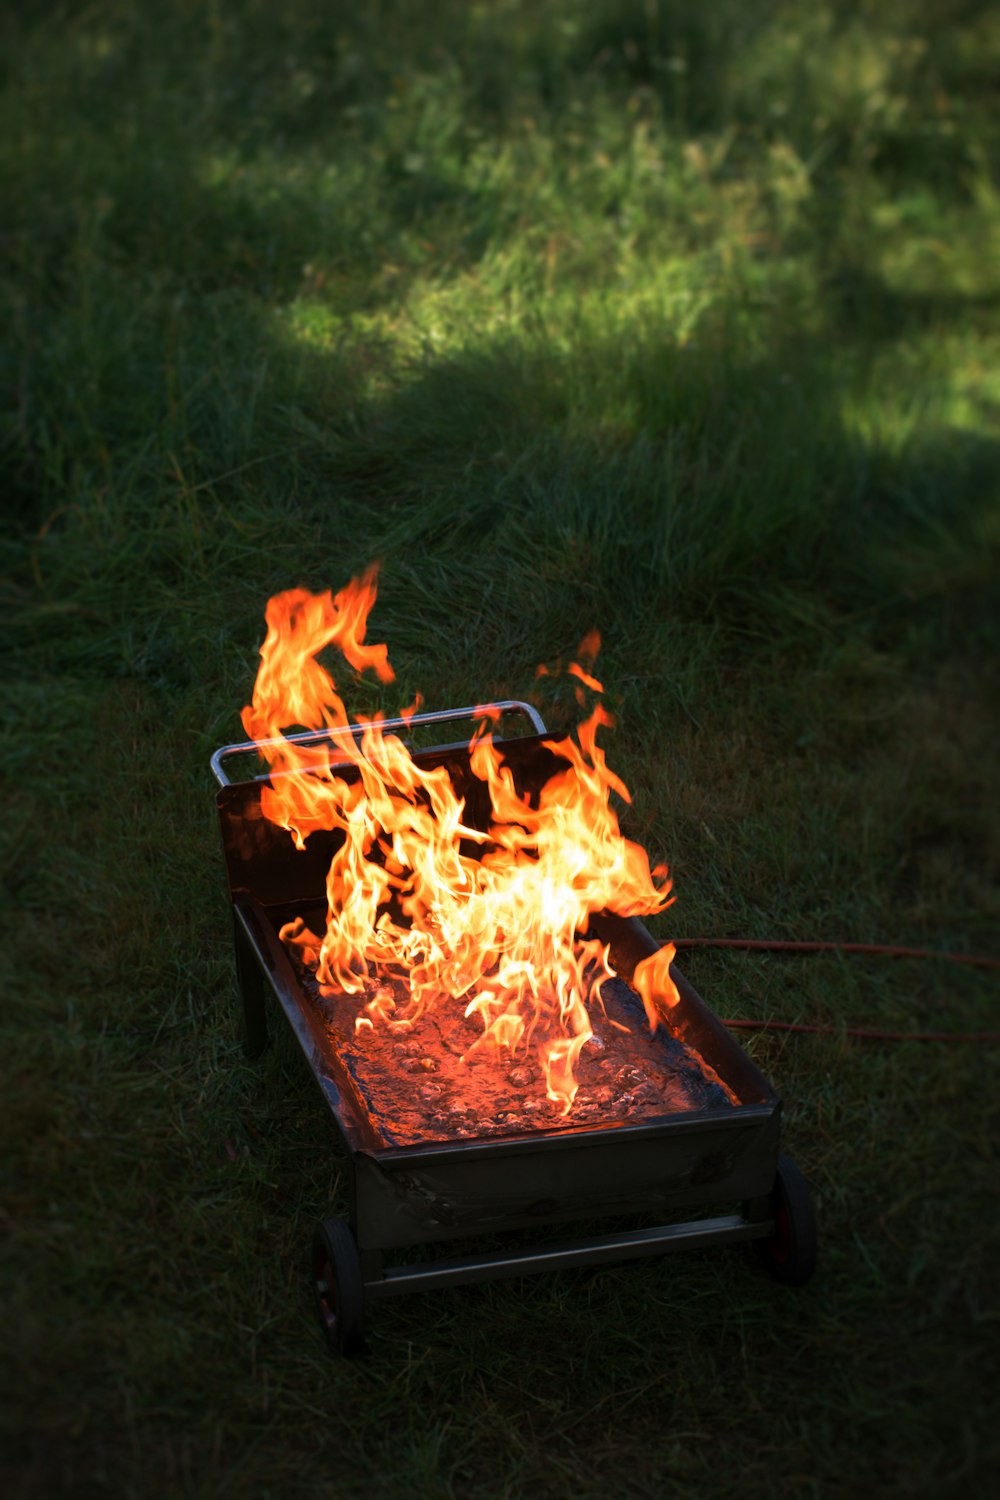 rectangular wheeled grill with fire on lawn during daytime